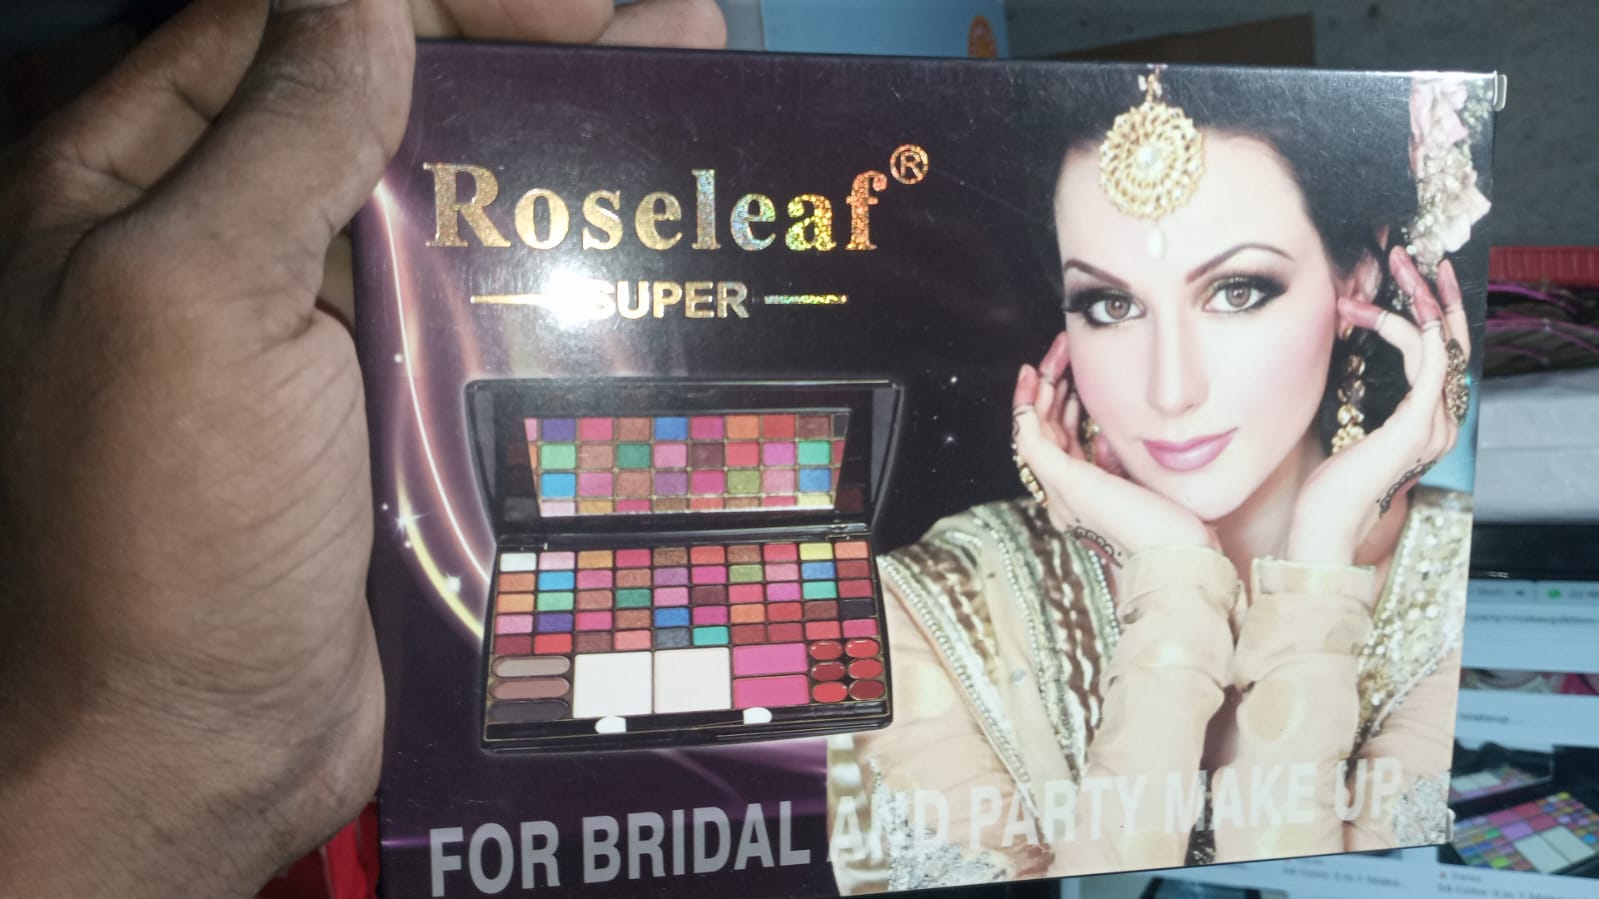 Roseleaf super for bridal and party makeup eyeshdow